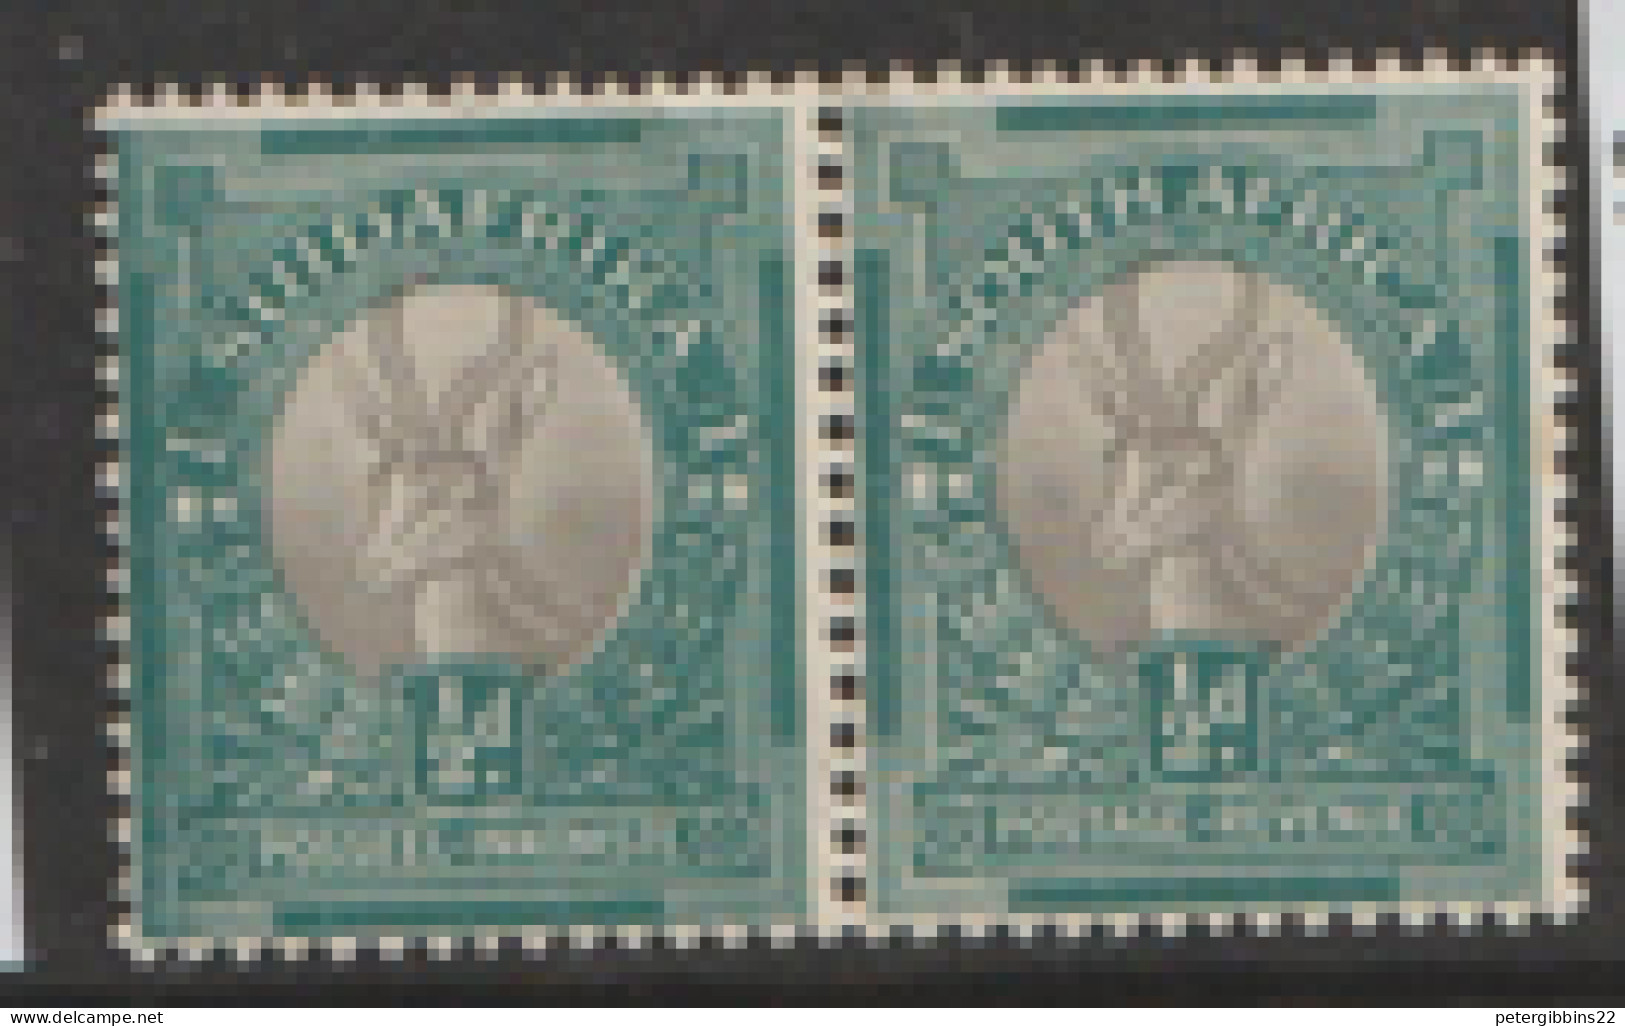 South Africa 1930  SG   42  1/2d  Mounted Mint - Nuevos